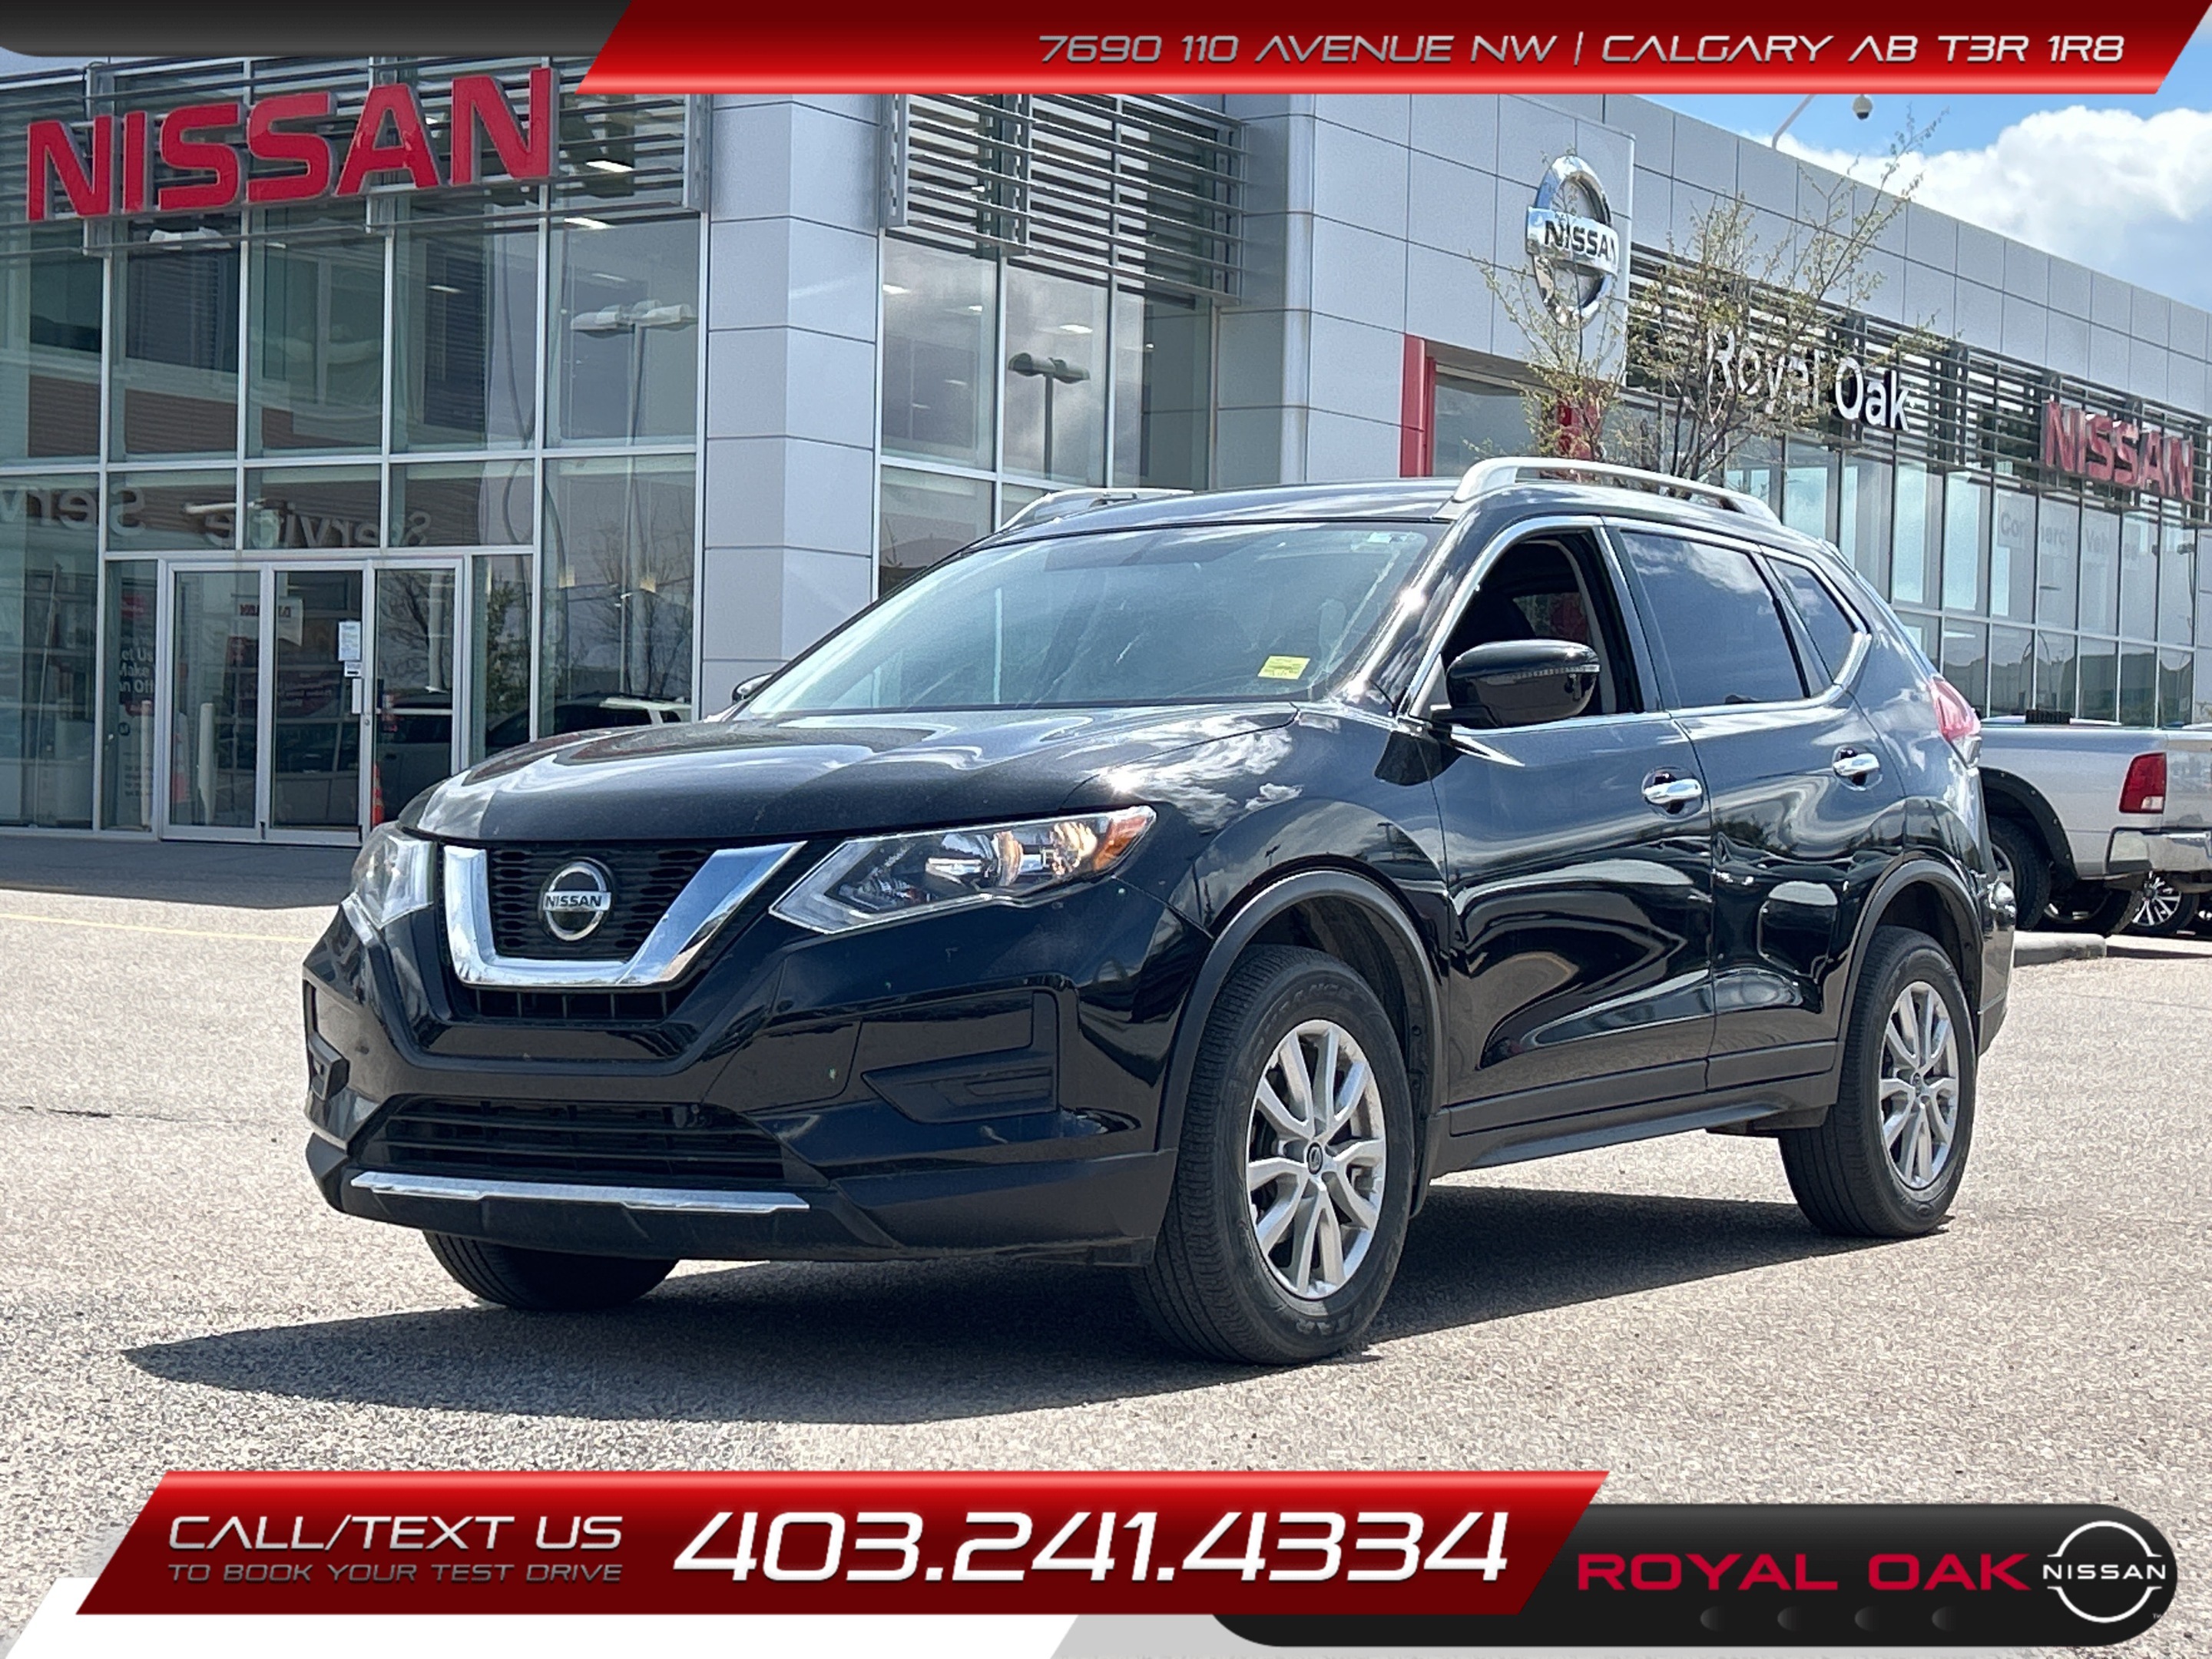 2020 Nissan Rogue AWD S - Certified Pre-Owned Vehicle (CPO)